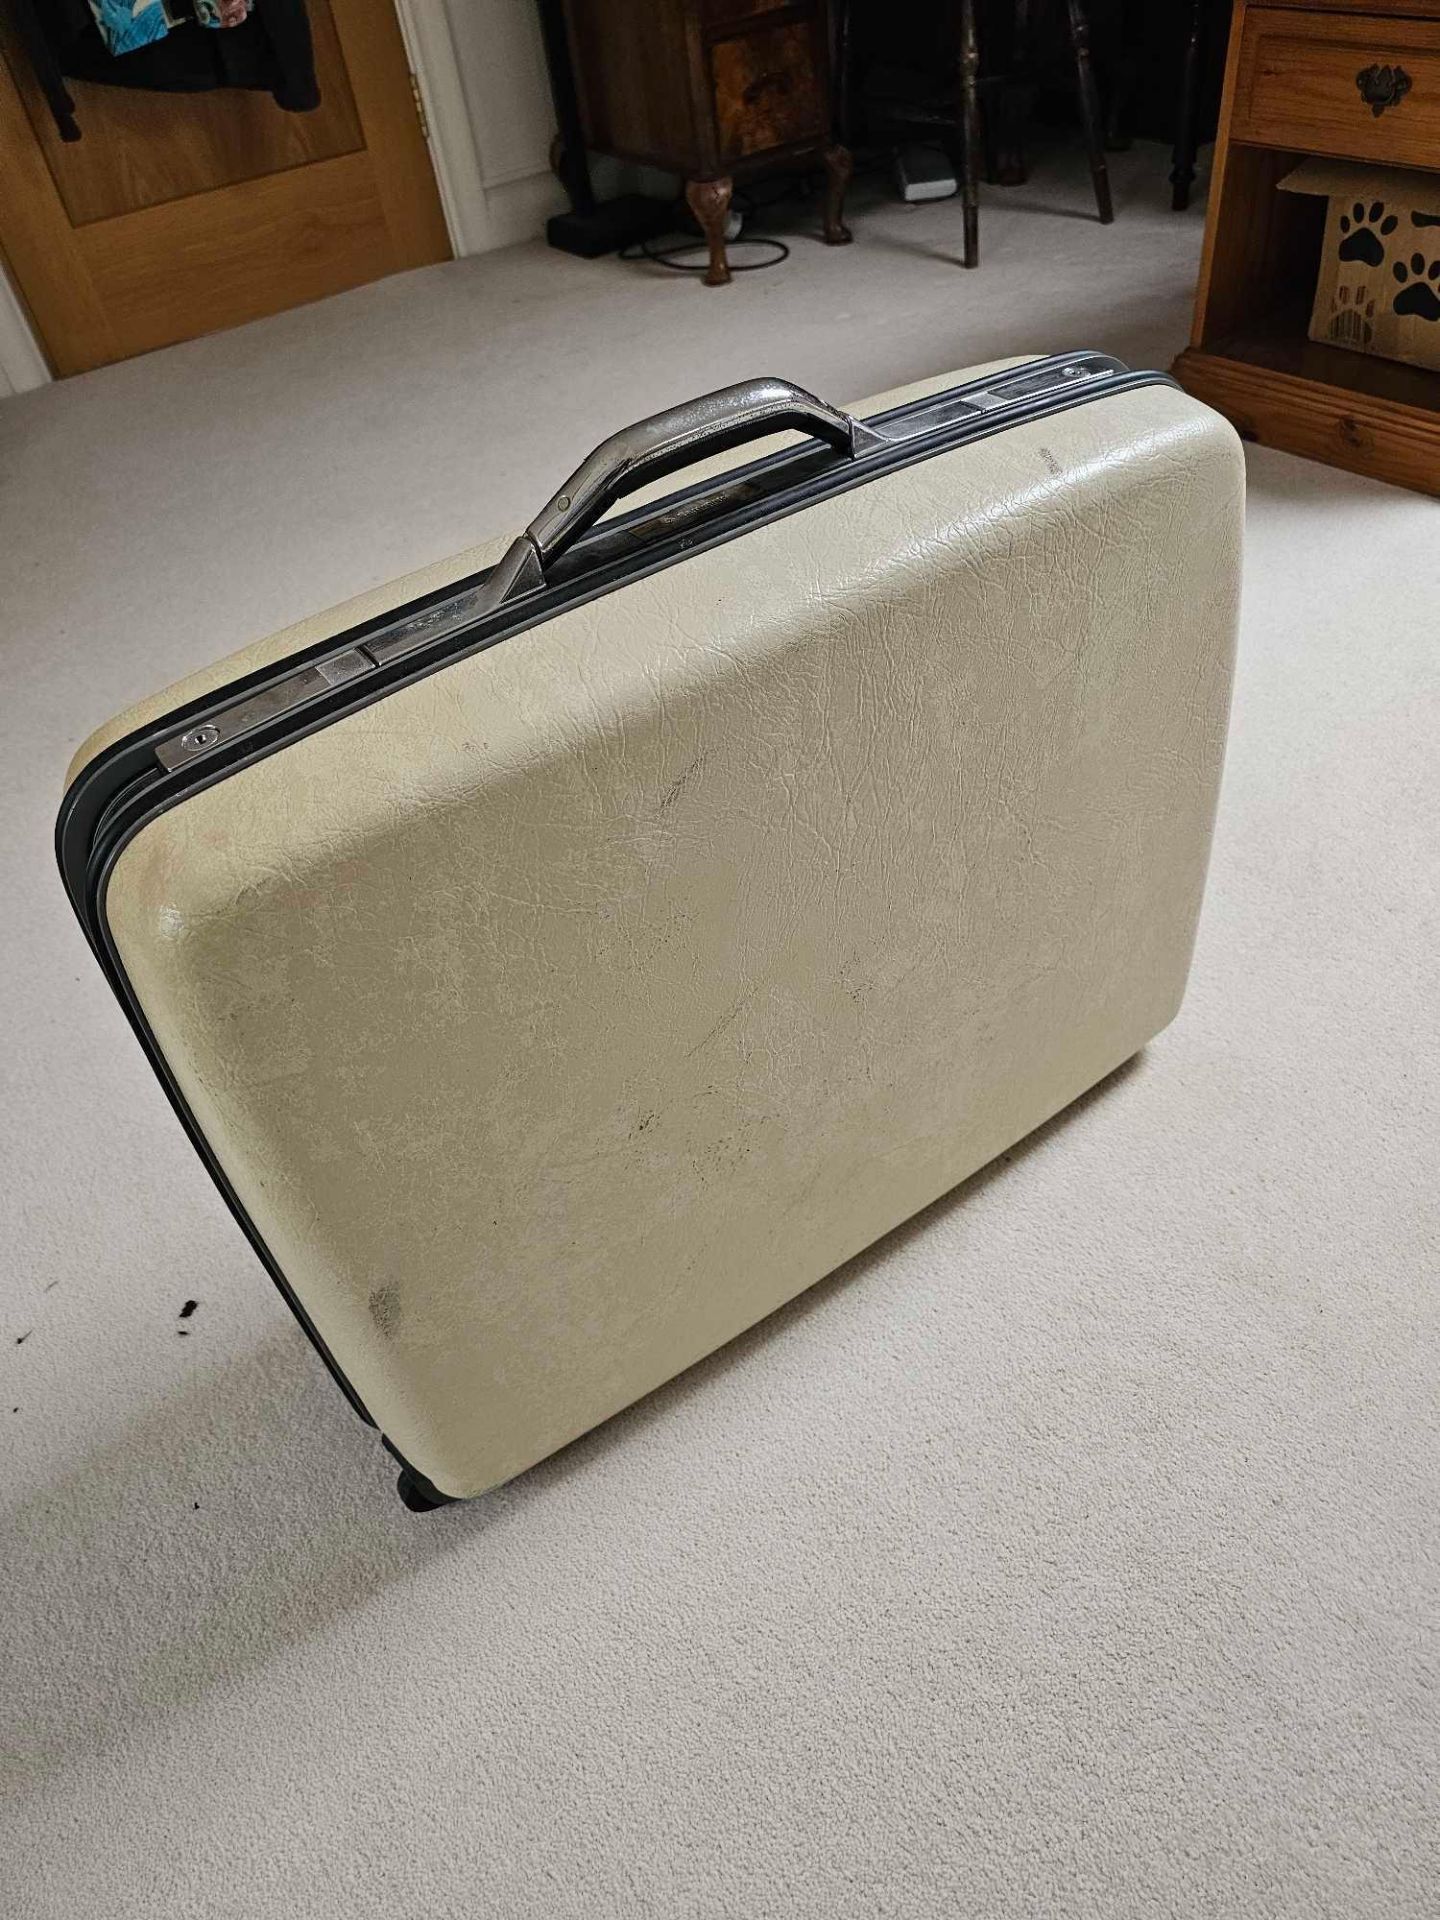 A Vintage 1960s Samsonite Silhouette Hard Shell Luggage Suitcase With Liner Intact - Image 4 of 4